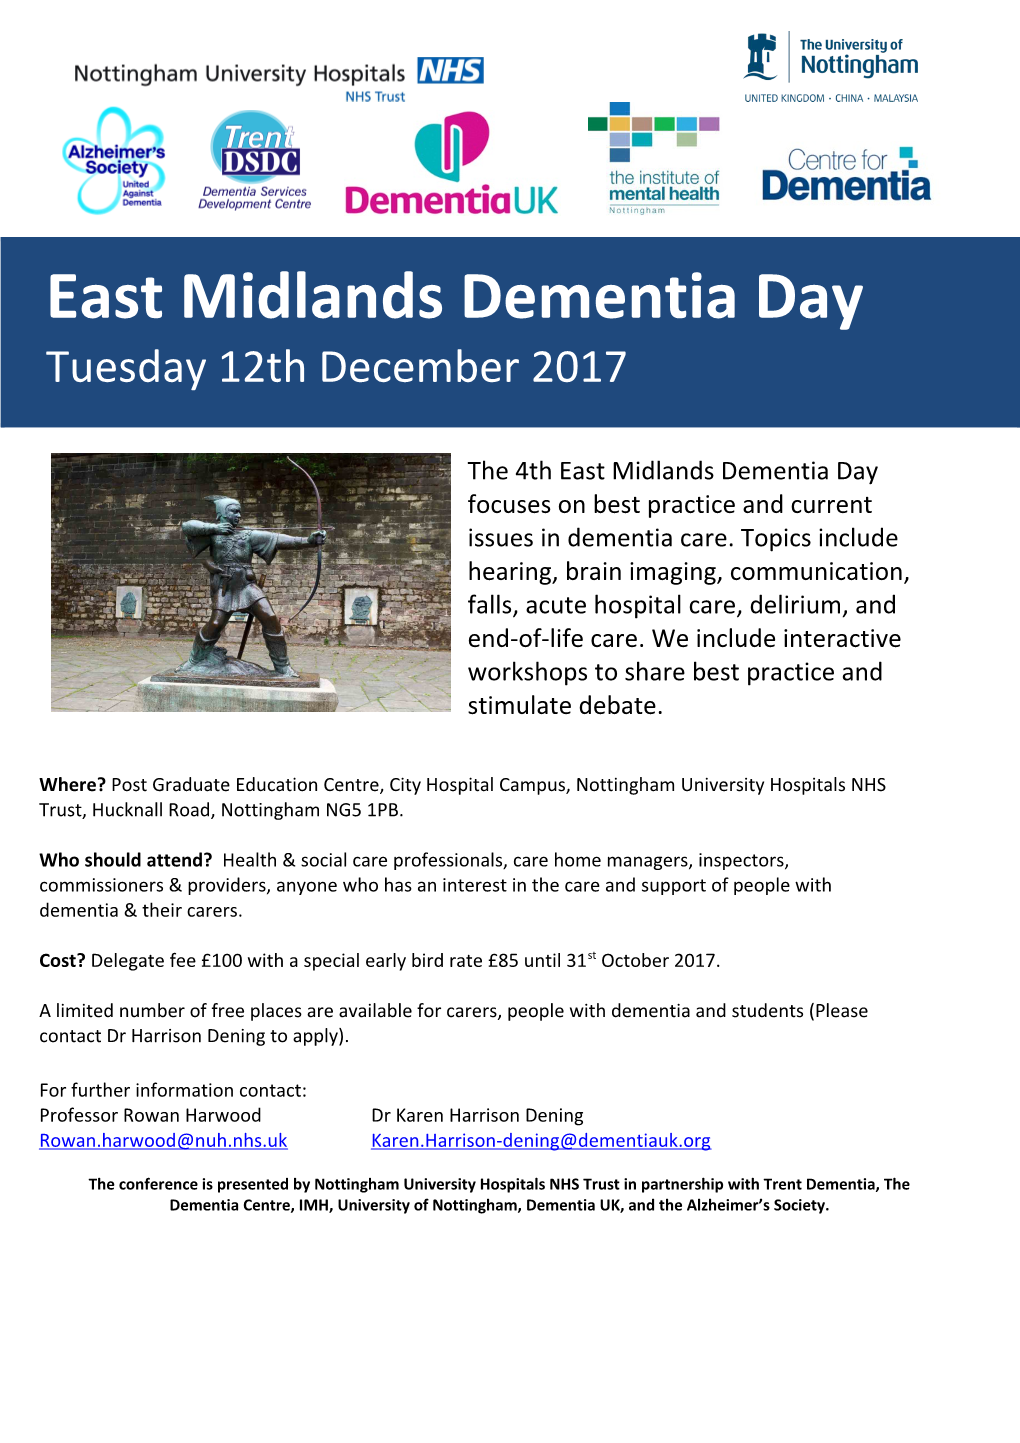 The 4Th East Midlands Dementia Day Focuses on Best Practice and Current Issues in Dementia